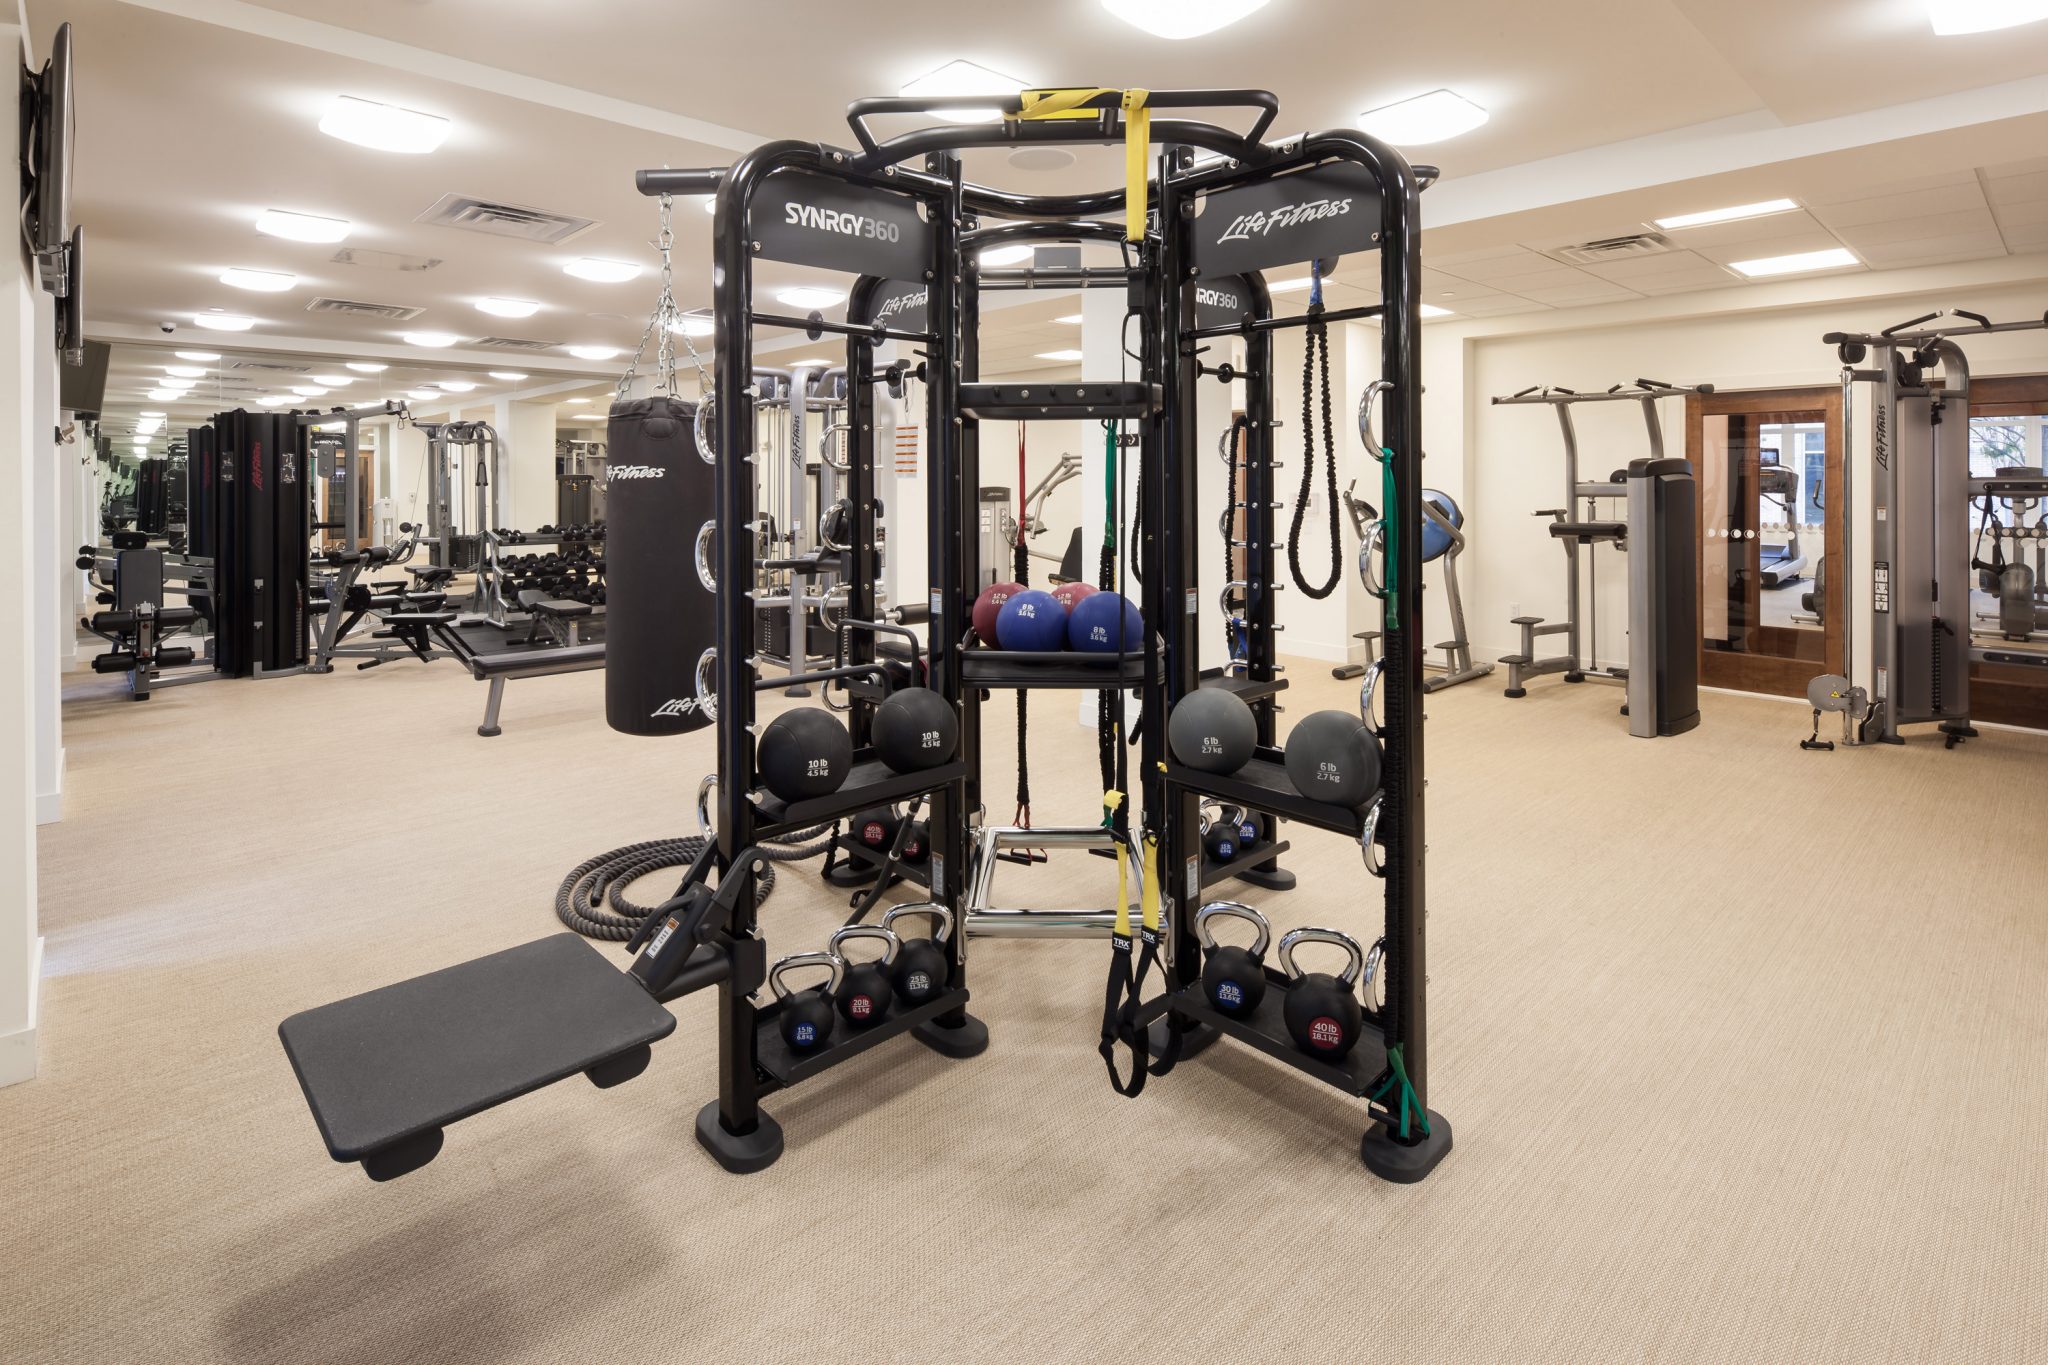 Interior of fitness center with free weights and other exercise machines.